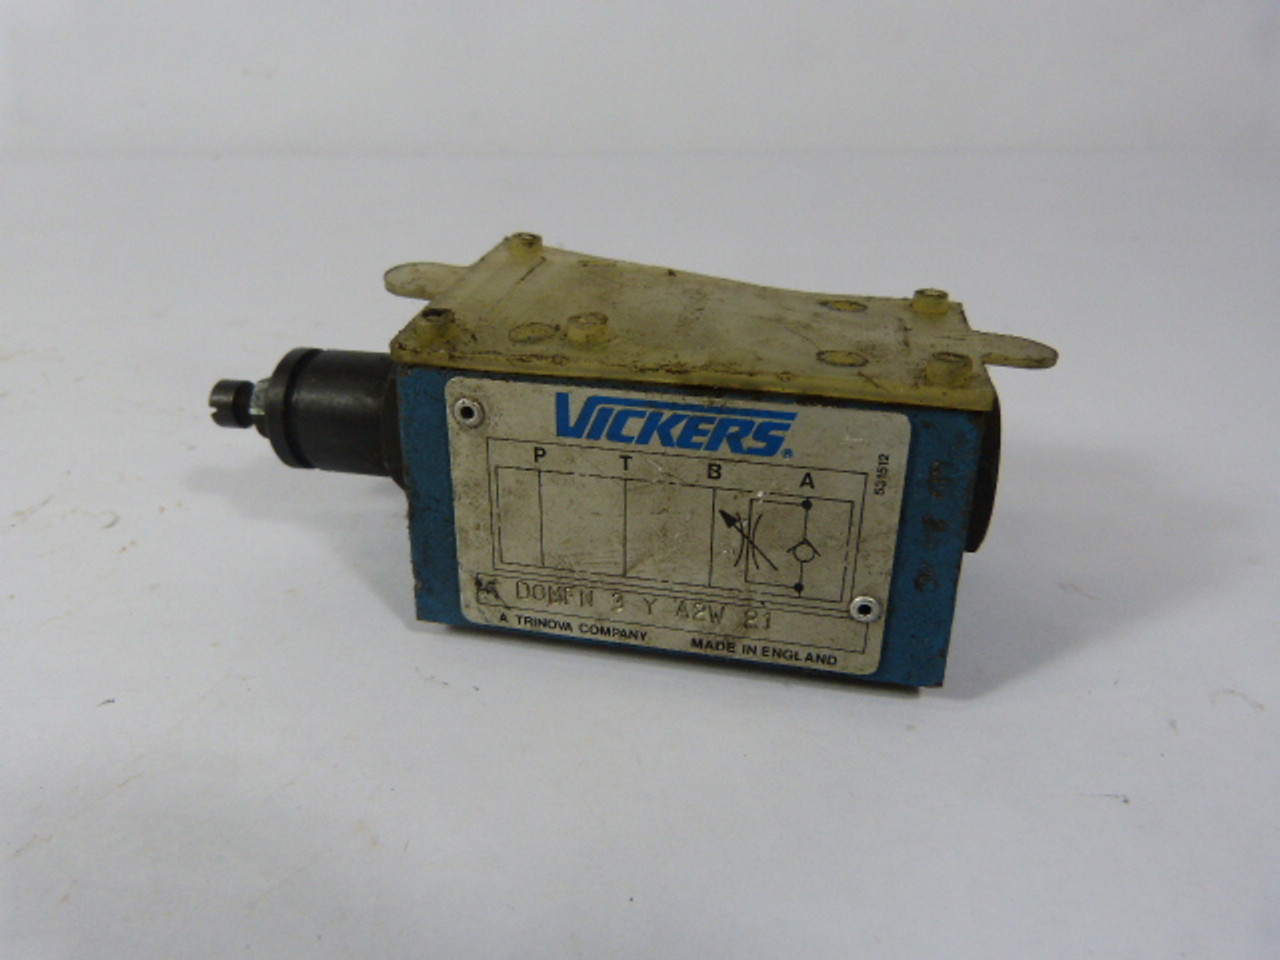 Vickers DGMFN34A2W21 Flow Control Valve USED